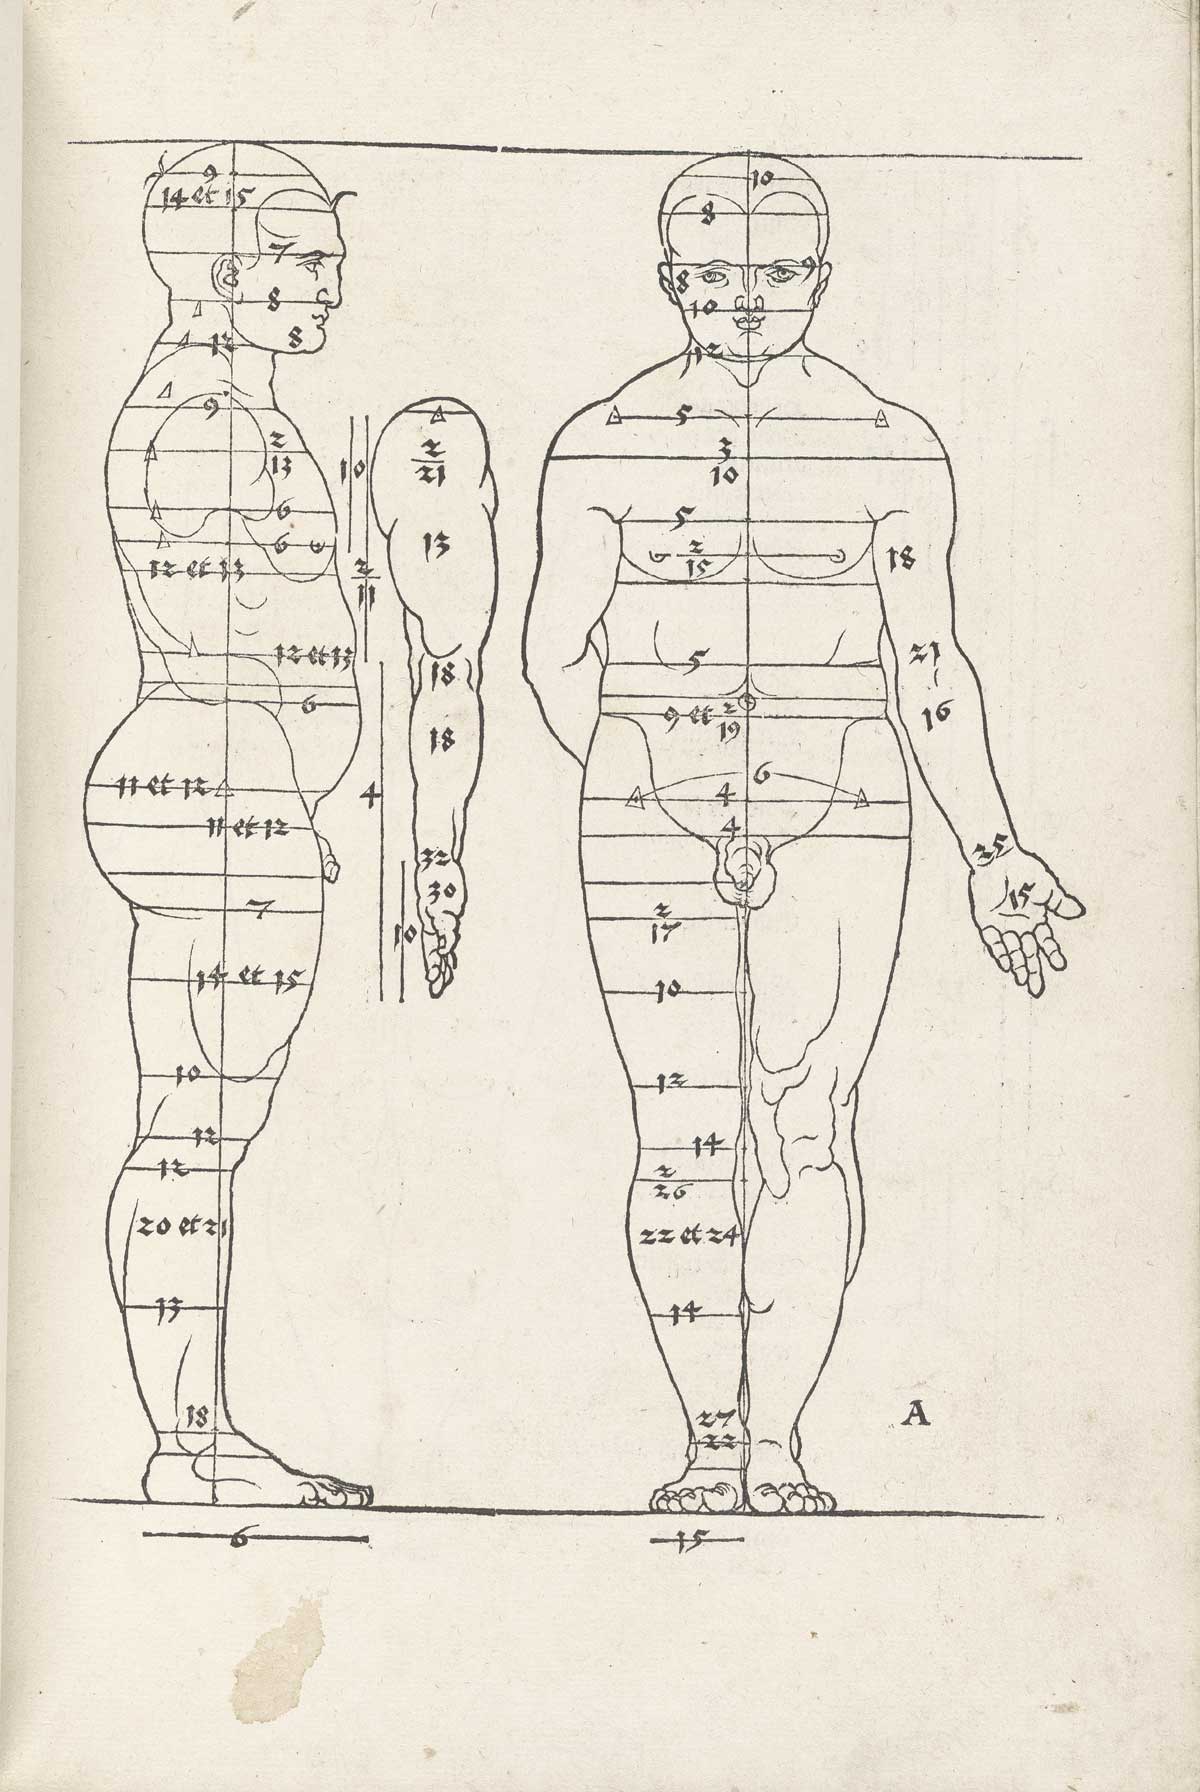 Woodcut image of two standing nude male figures, the one on the right facing the viewer and the one on the left in profile facing to the right, both with horizontal lines cutting across the figures showing proportions, for instance from the bottom of the chin to the top of the shoulder, from Albrecht Dürer’s Vier Bücher von menschlicher Proportion, NLM Call no. WZ 240 D853v 1528.